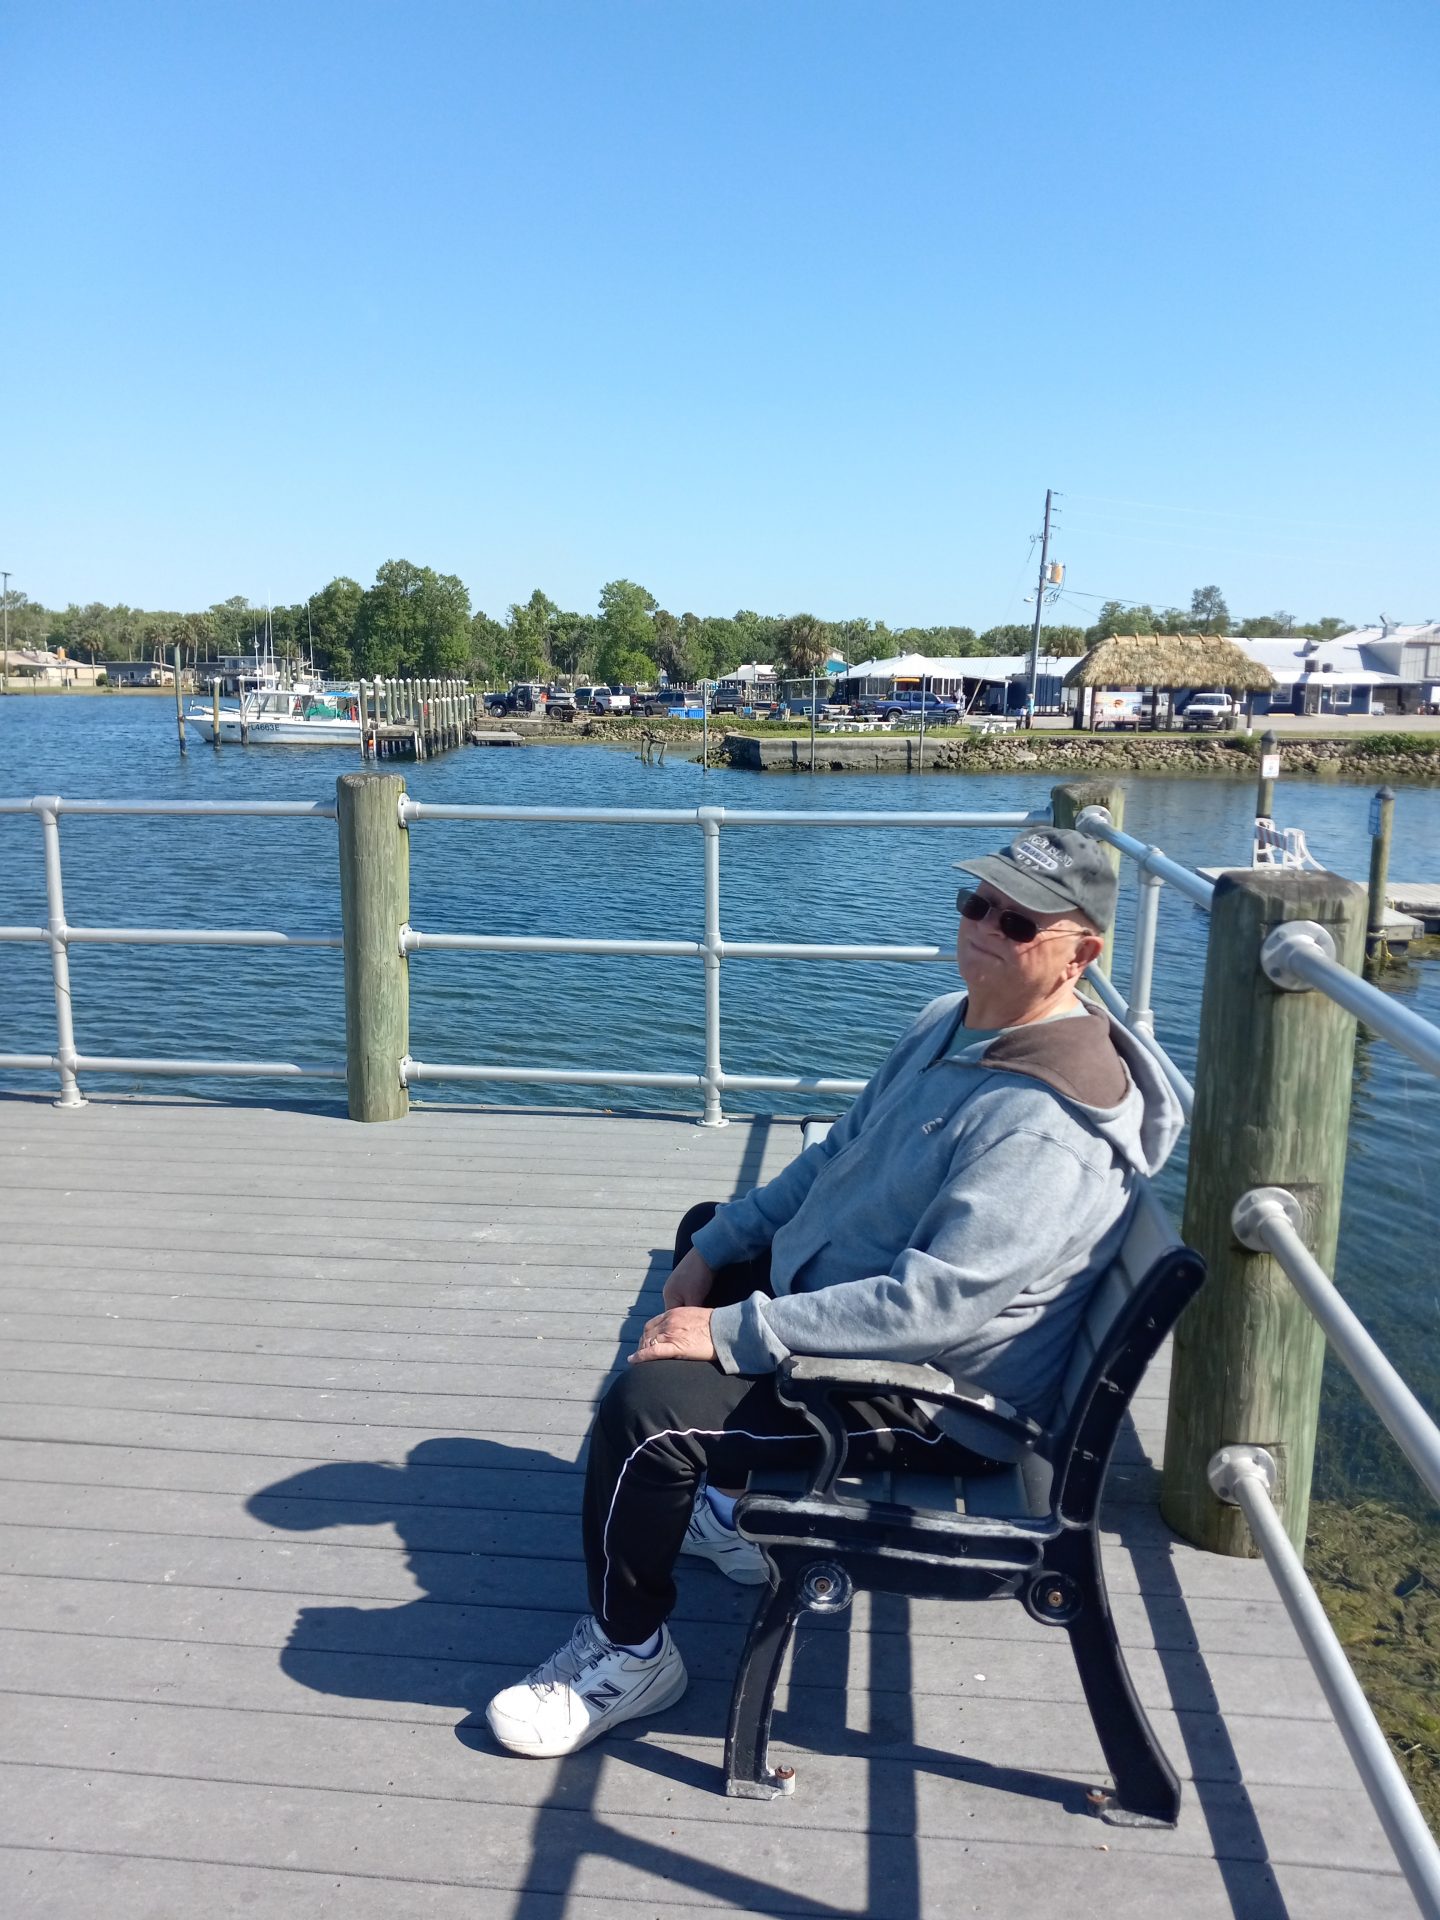 Don relaxing at our Crystal River trip!